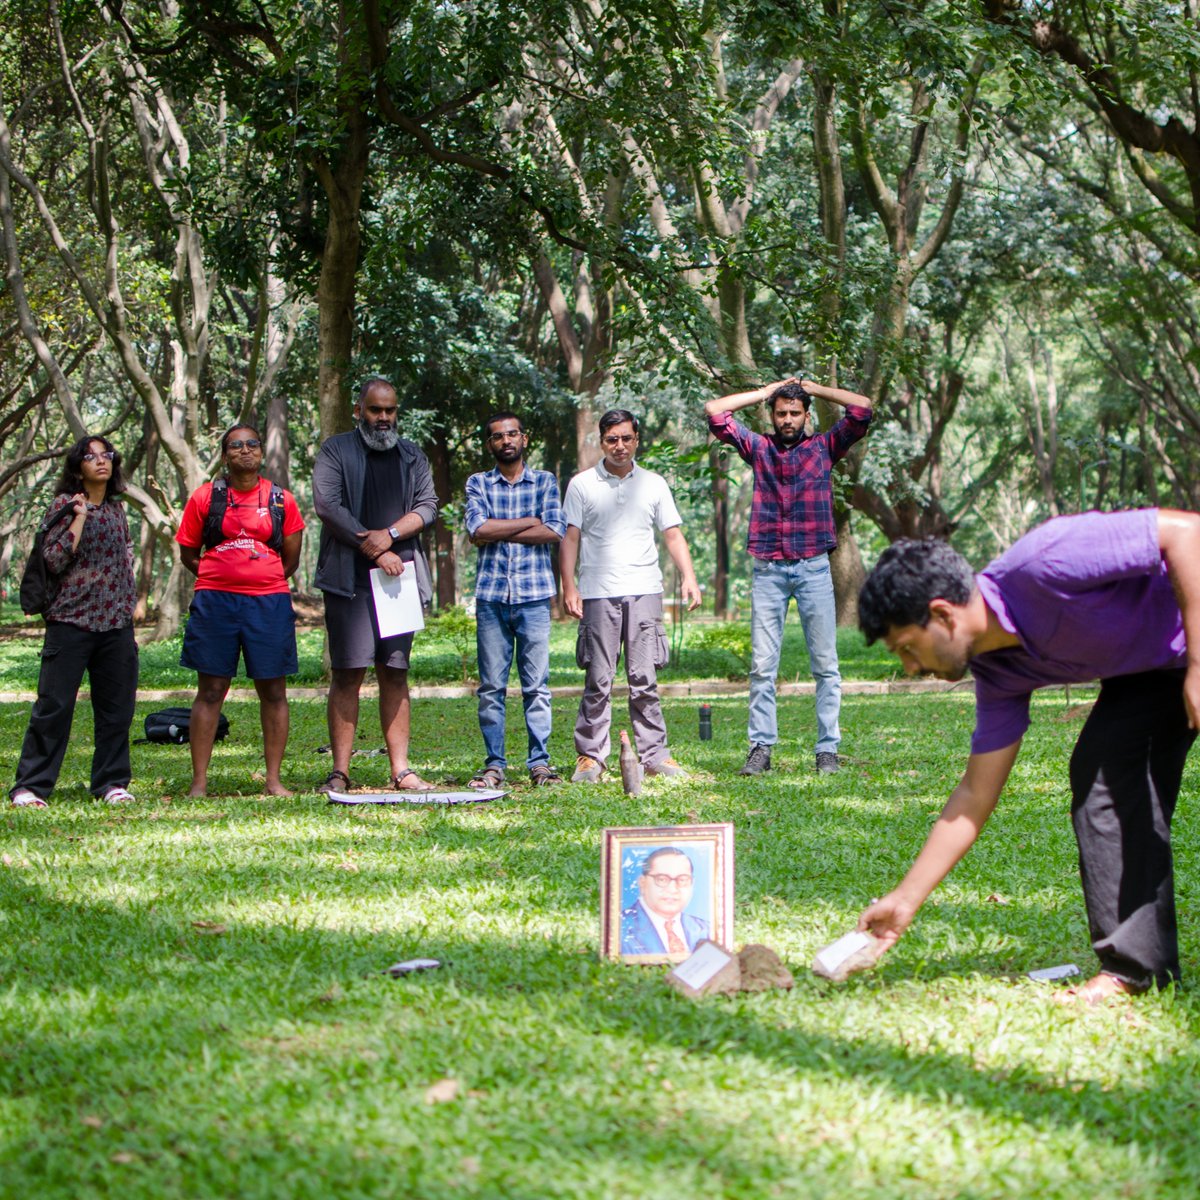 Ambedkar Reading Circle uses #FieldsofView's #CityGame in a workshop at #CubbonPark, exploring formal-informal sector dynamics. With 45+ participants, the #game assesses political visions, challenging roles and personal politics. #ARC #Bangalore #Workshop #CasteDynamics